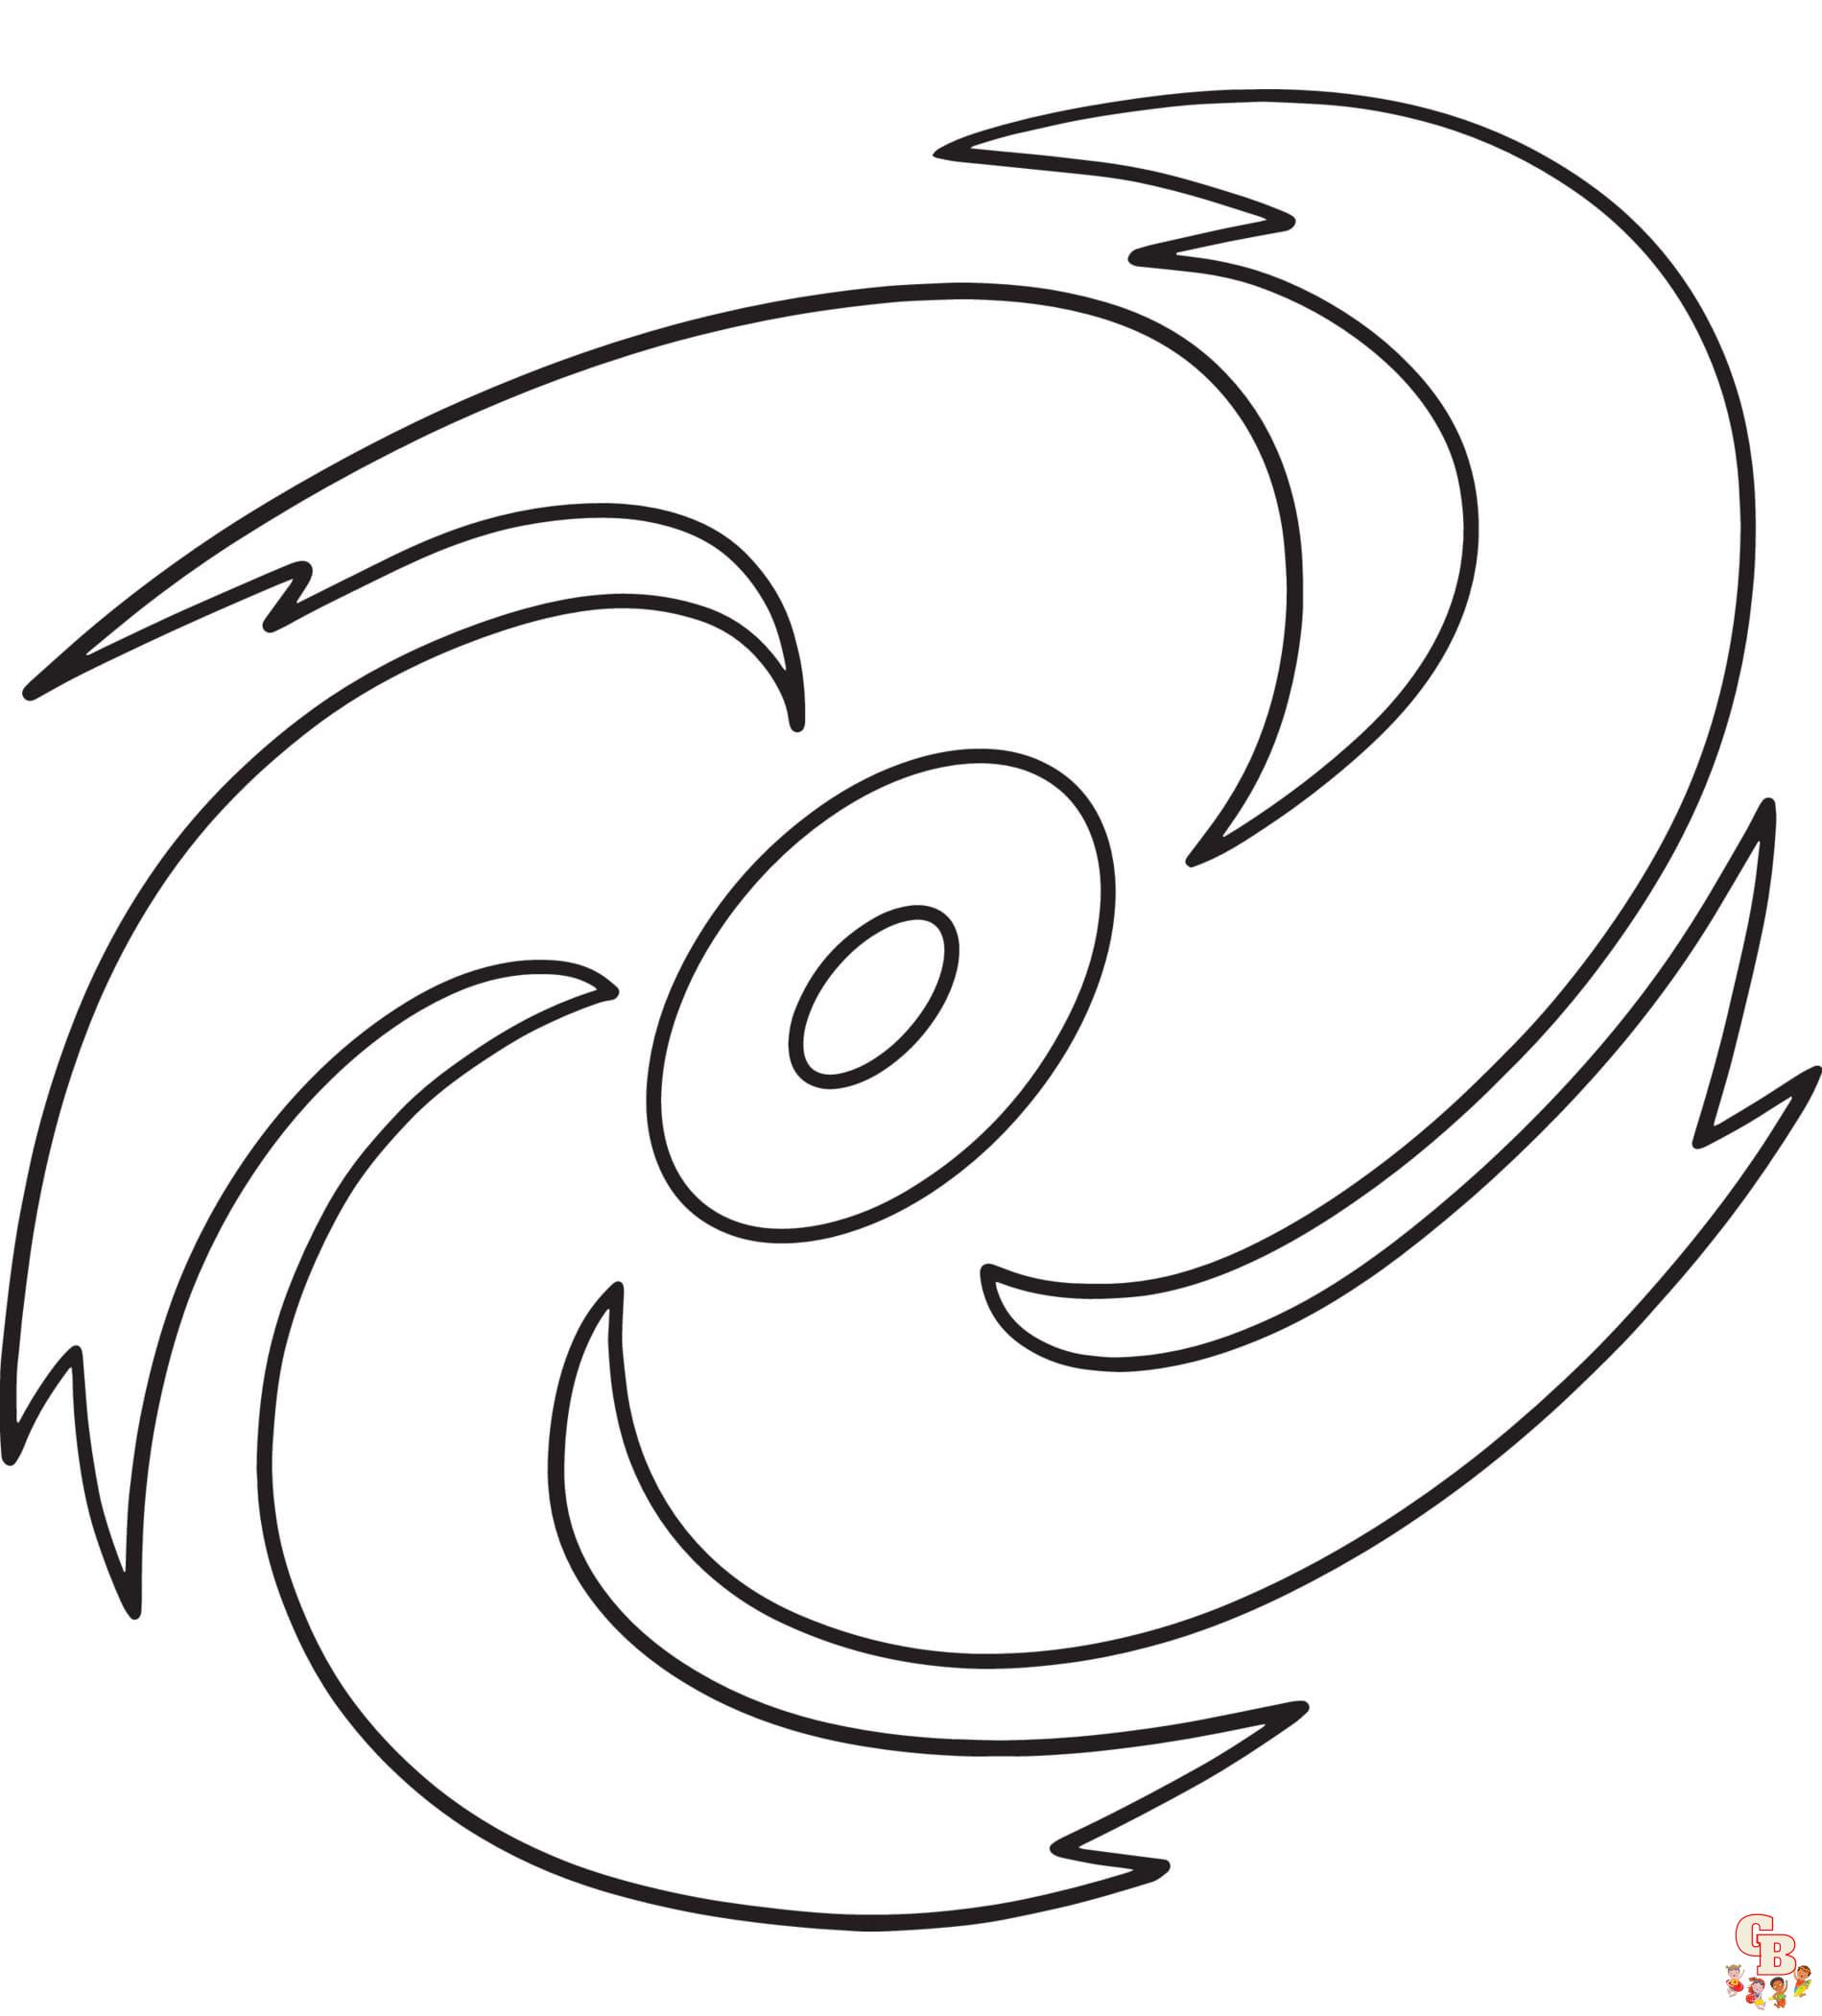 Free Black hole coloring pages for kids